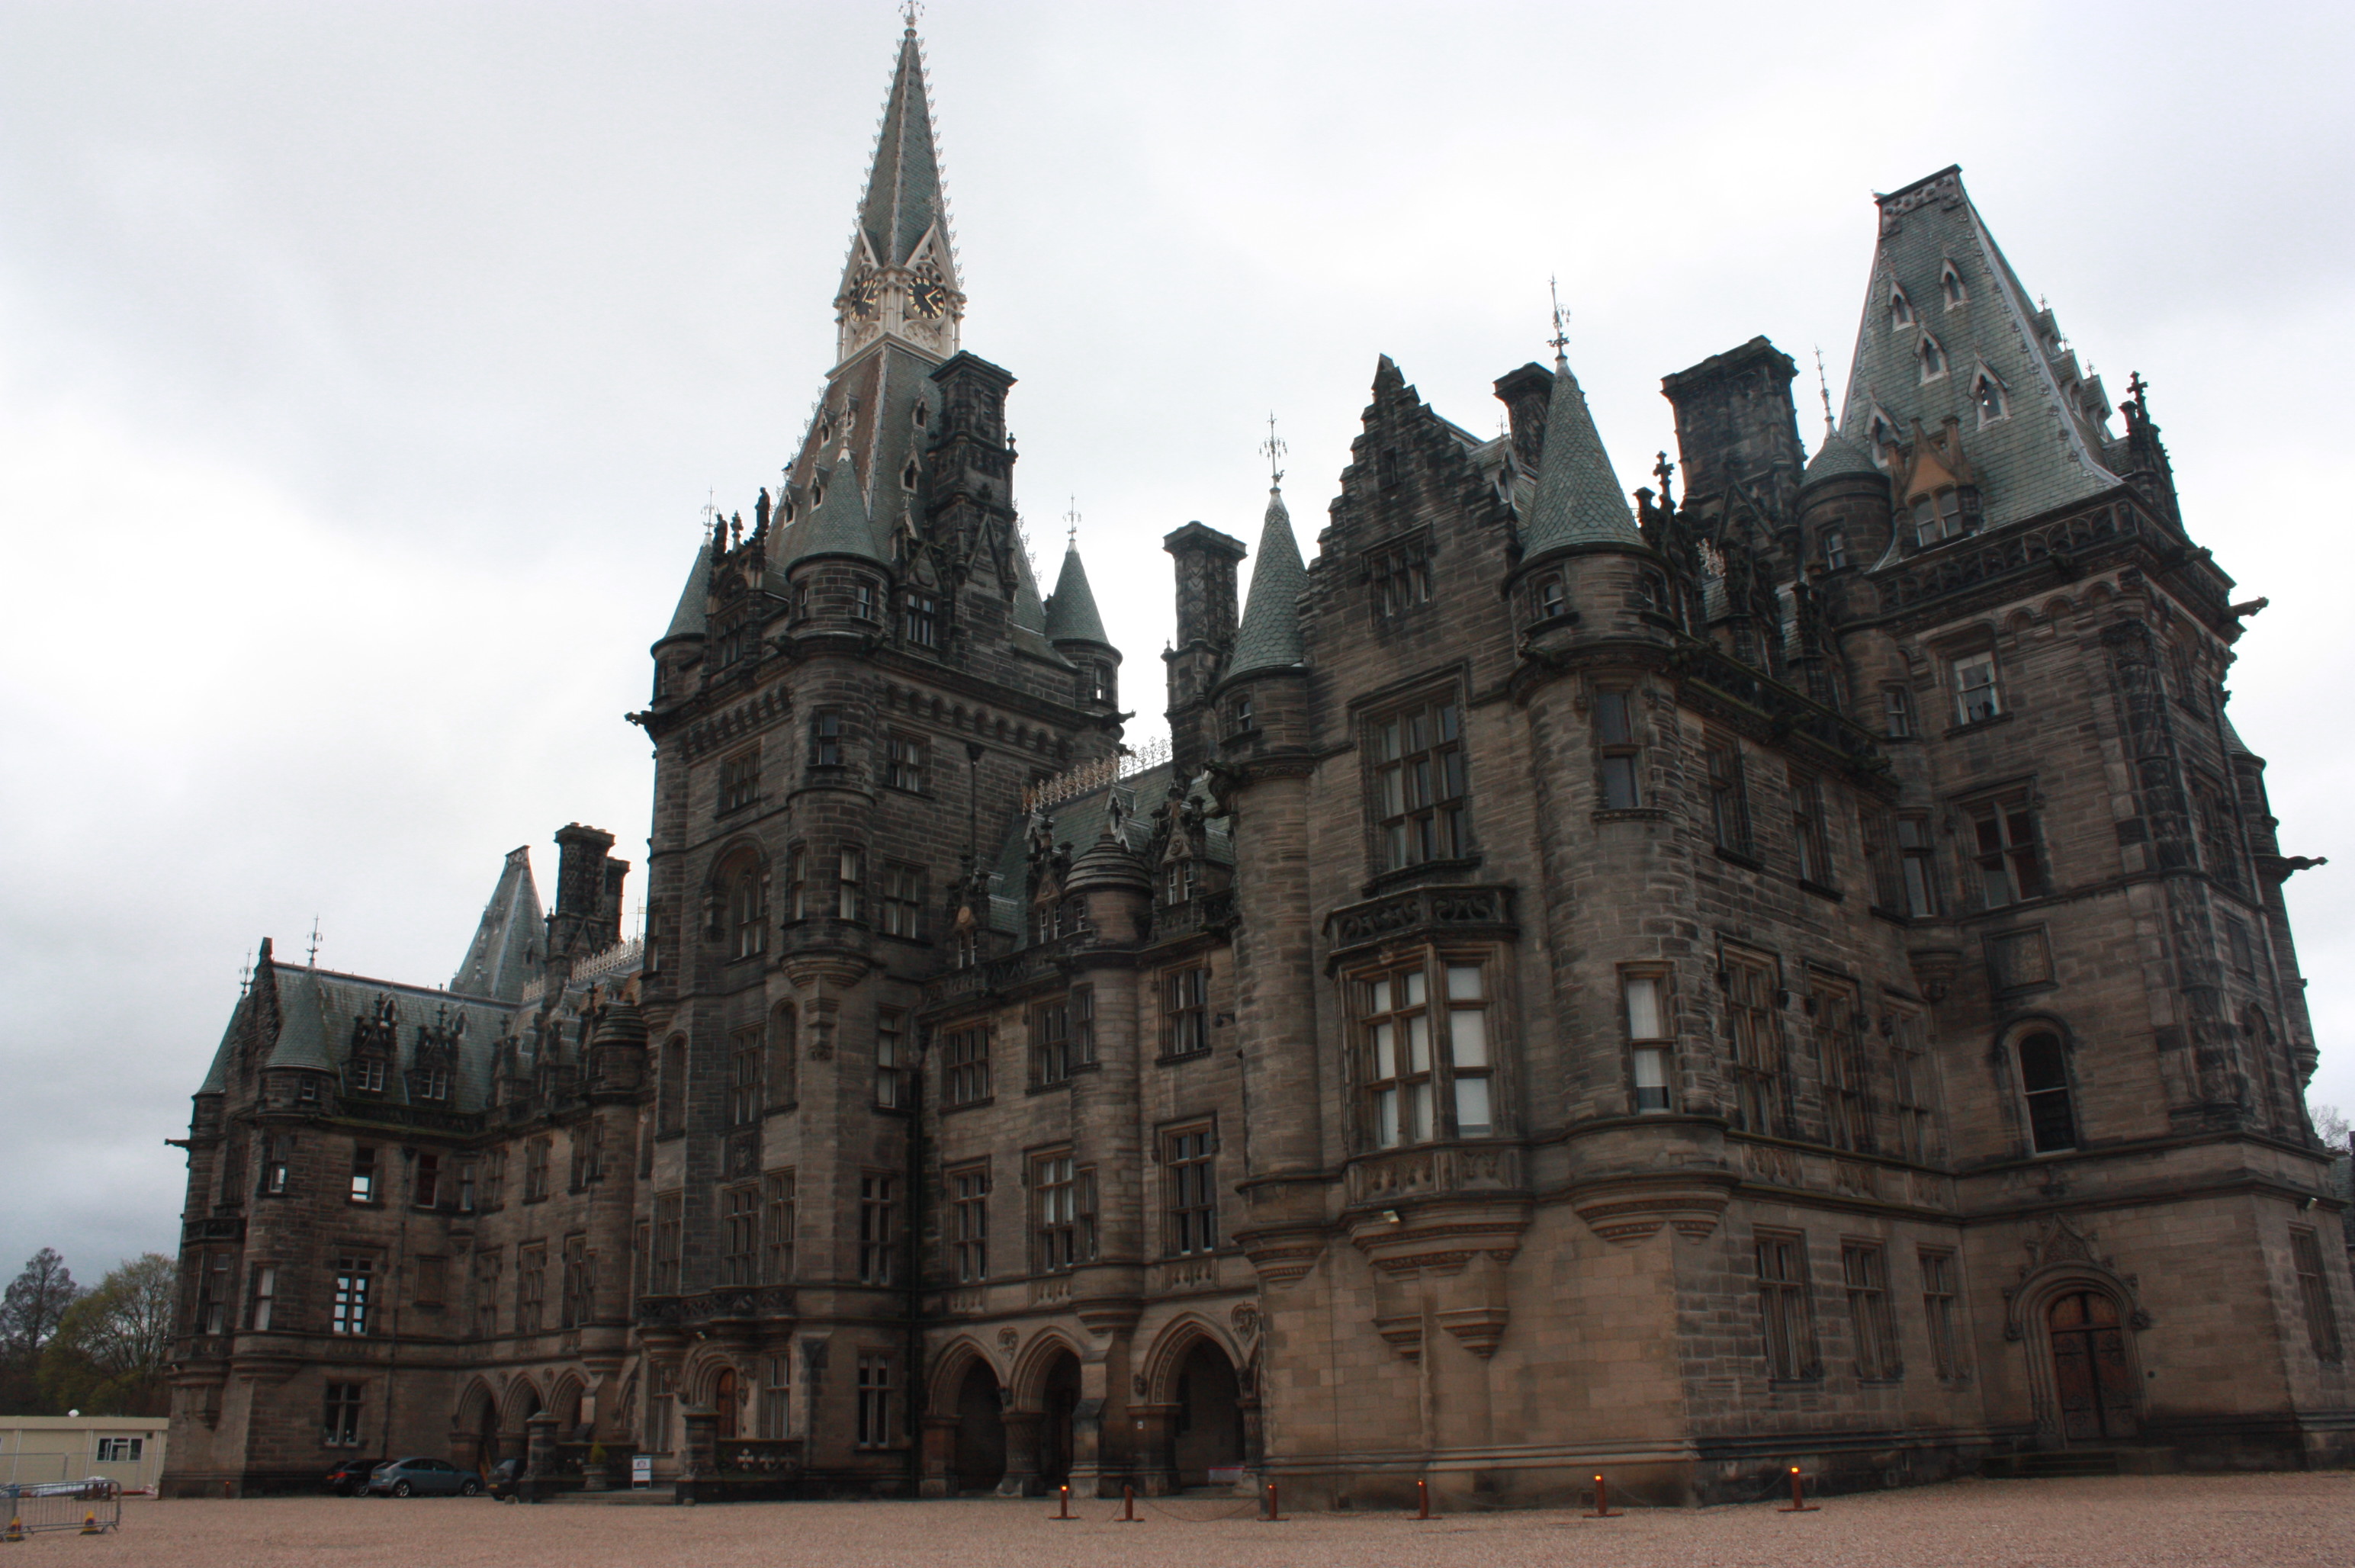 Fettes_College_from_the_south-east.JPG